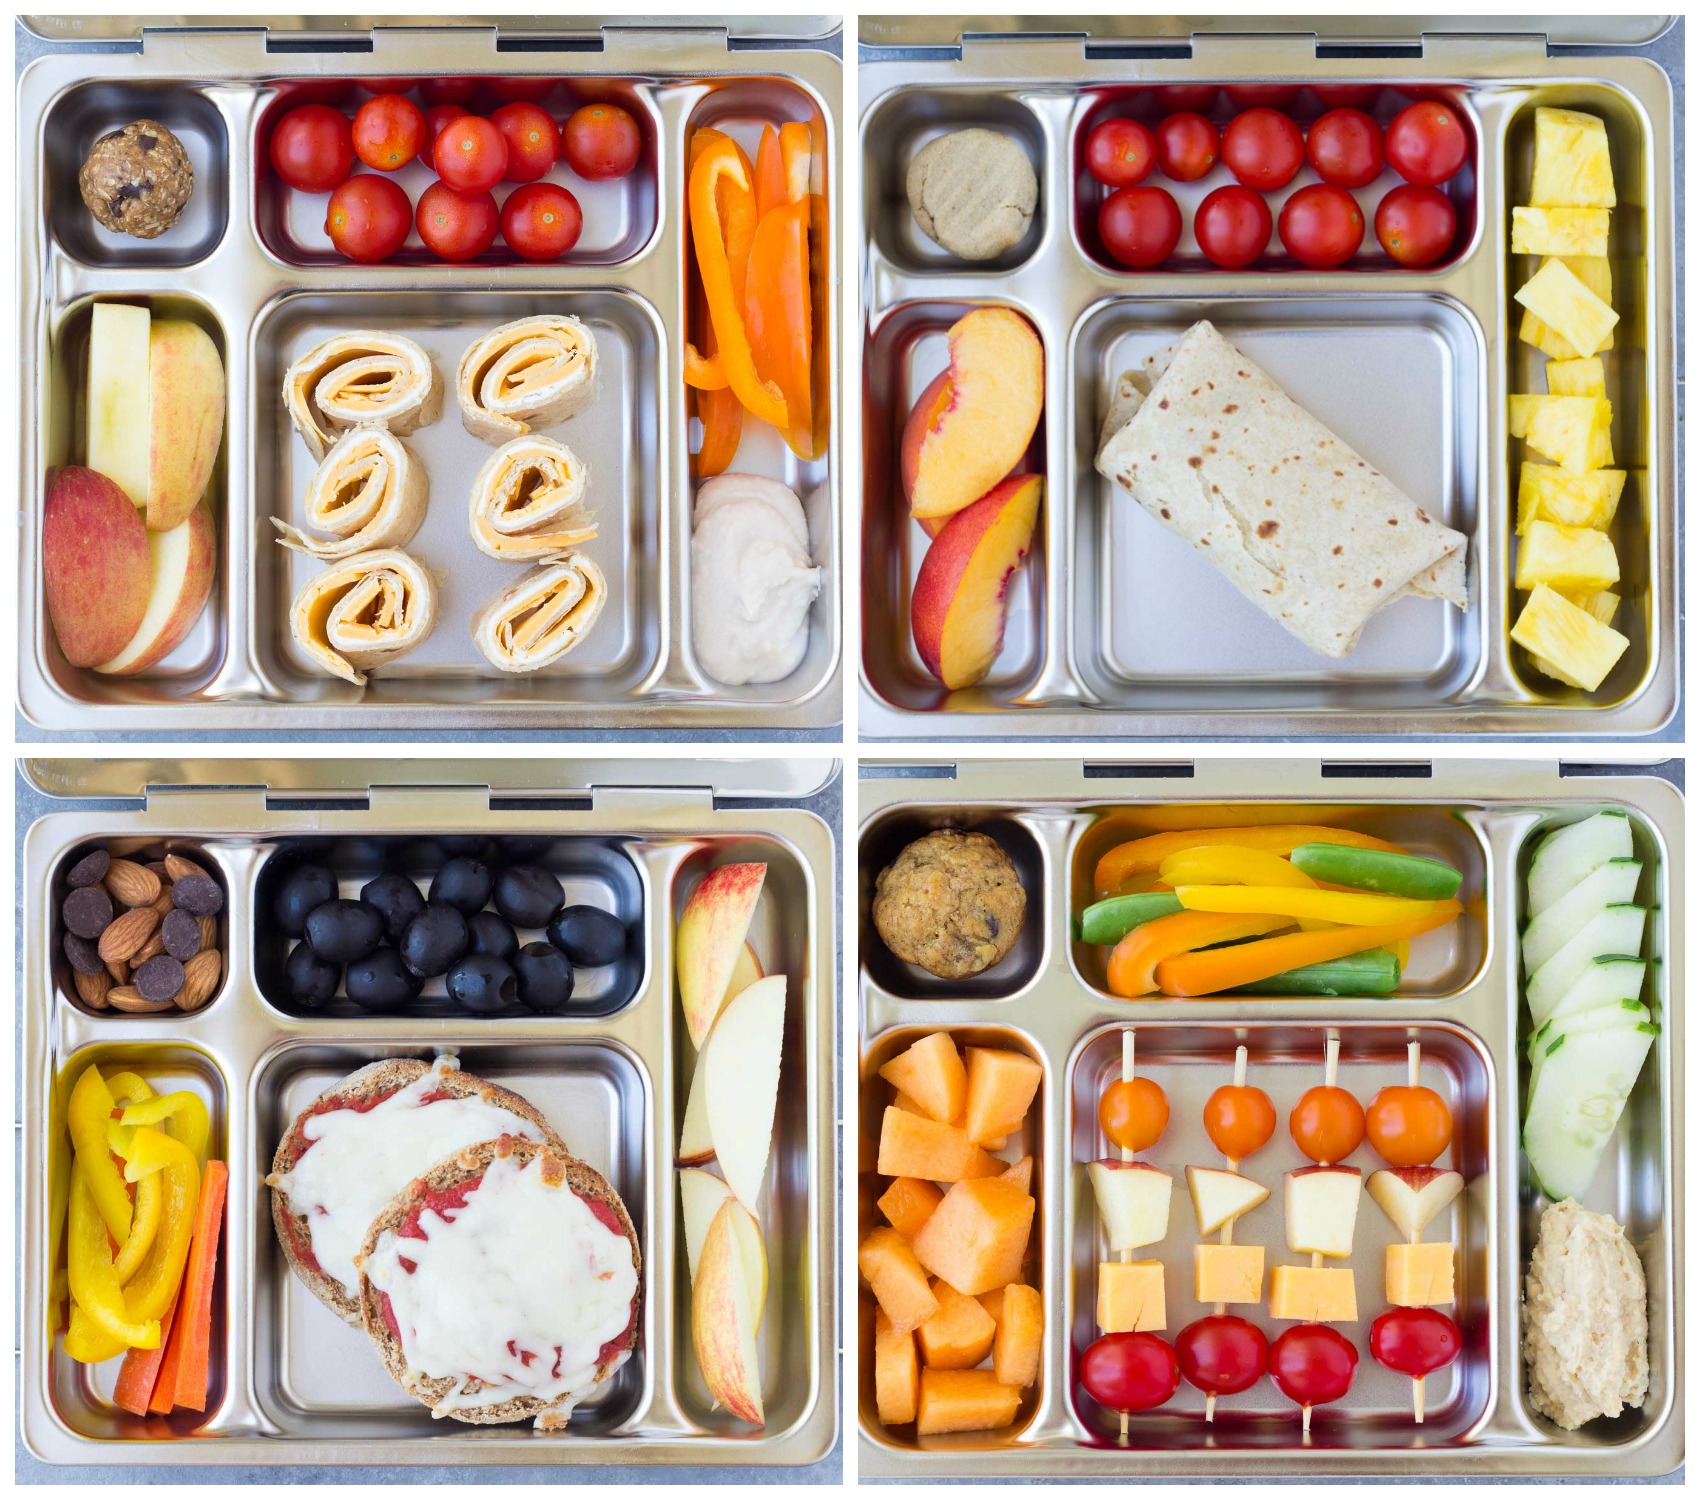 10 Healthy School Lunches for Kids - Kristine's Kitchen